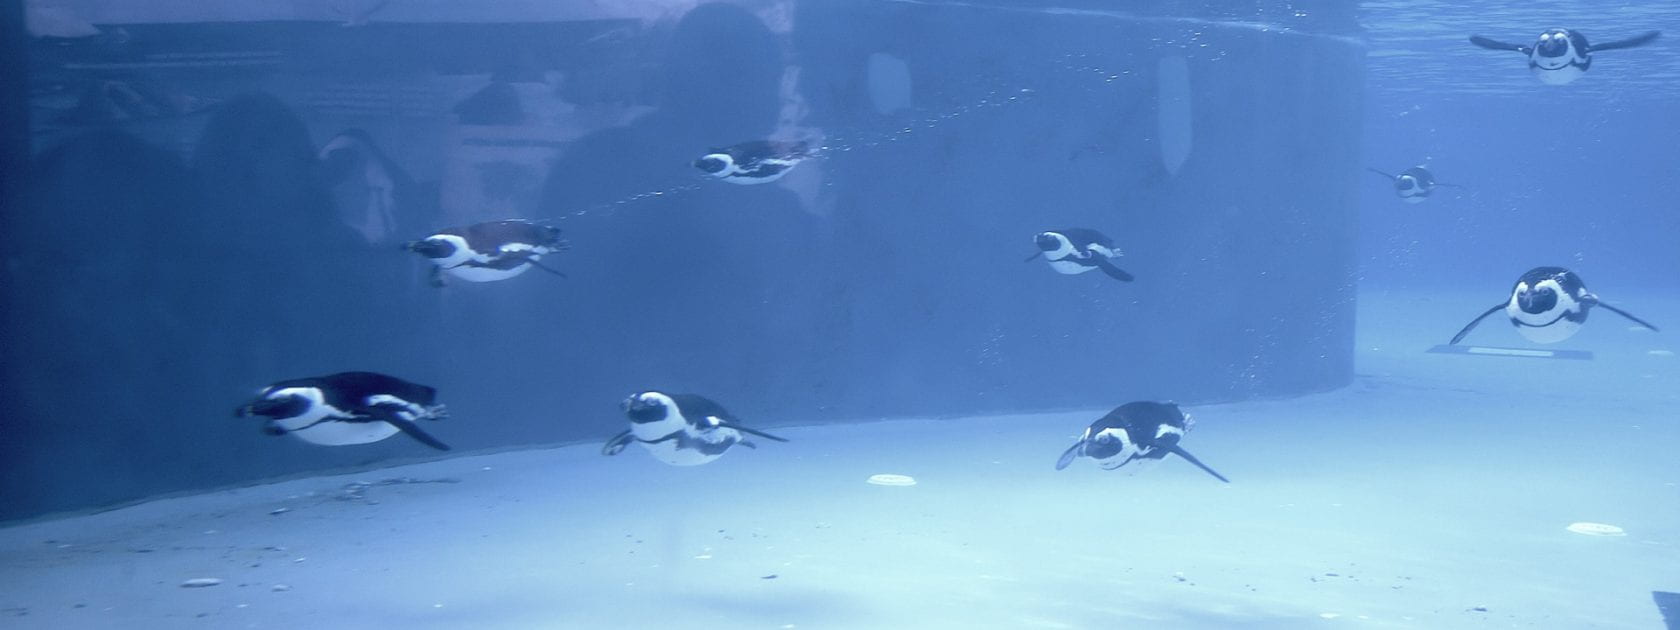 Penguins swimming in a deep blue pool in a zoo